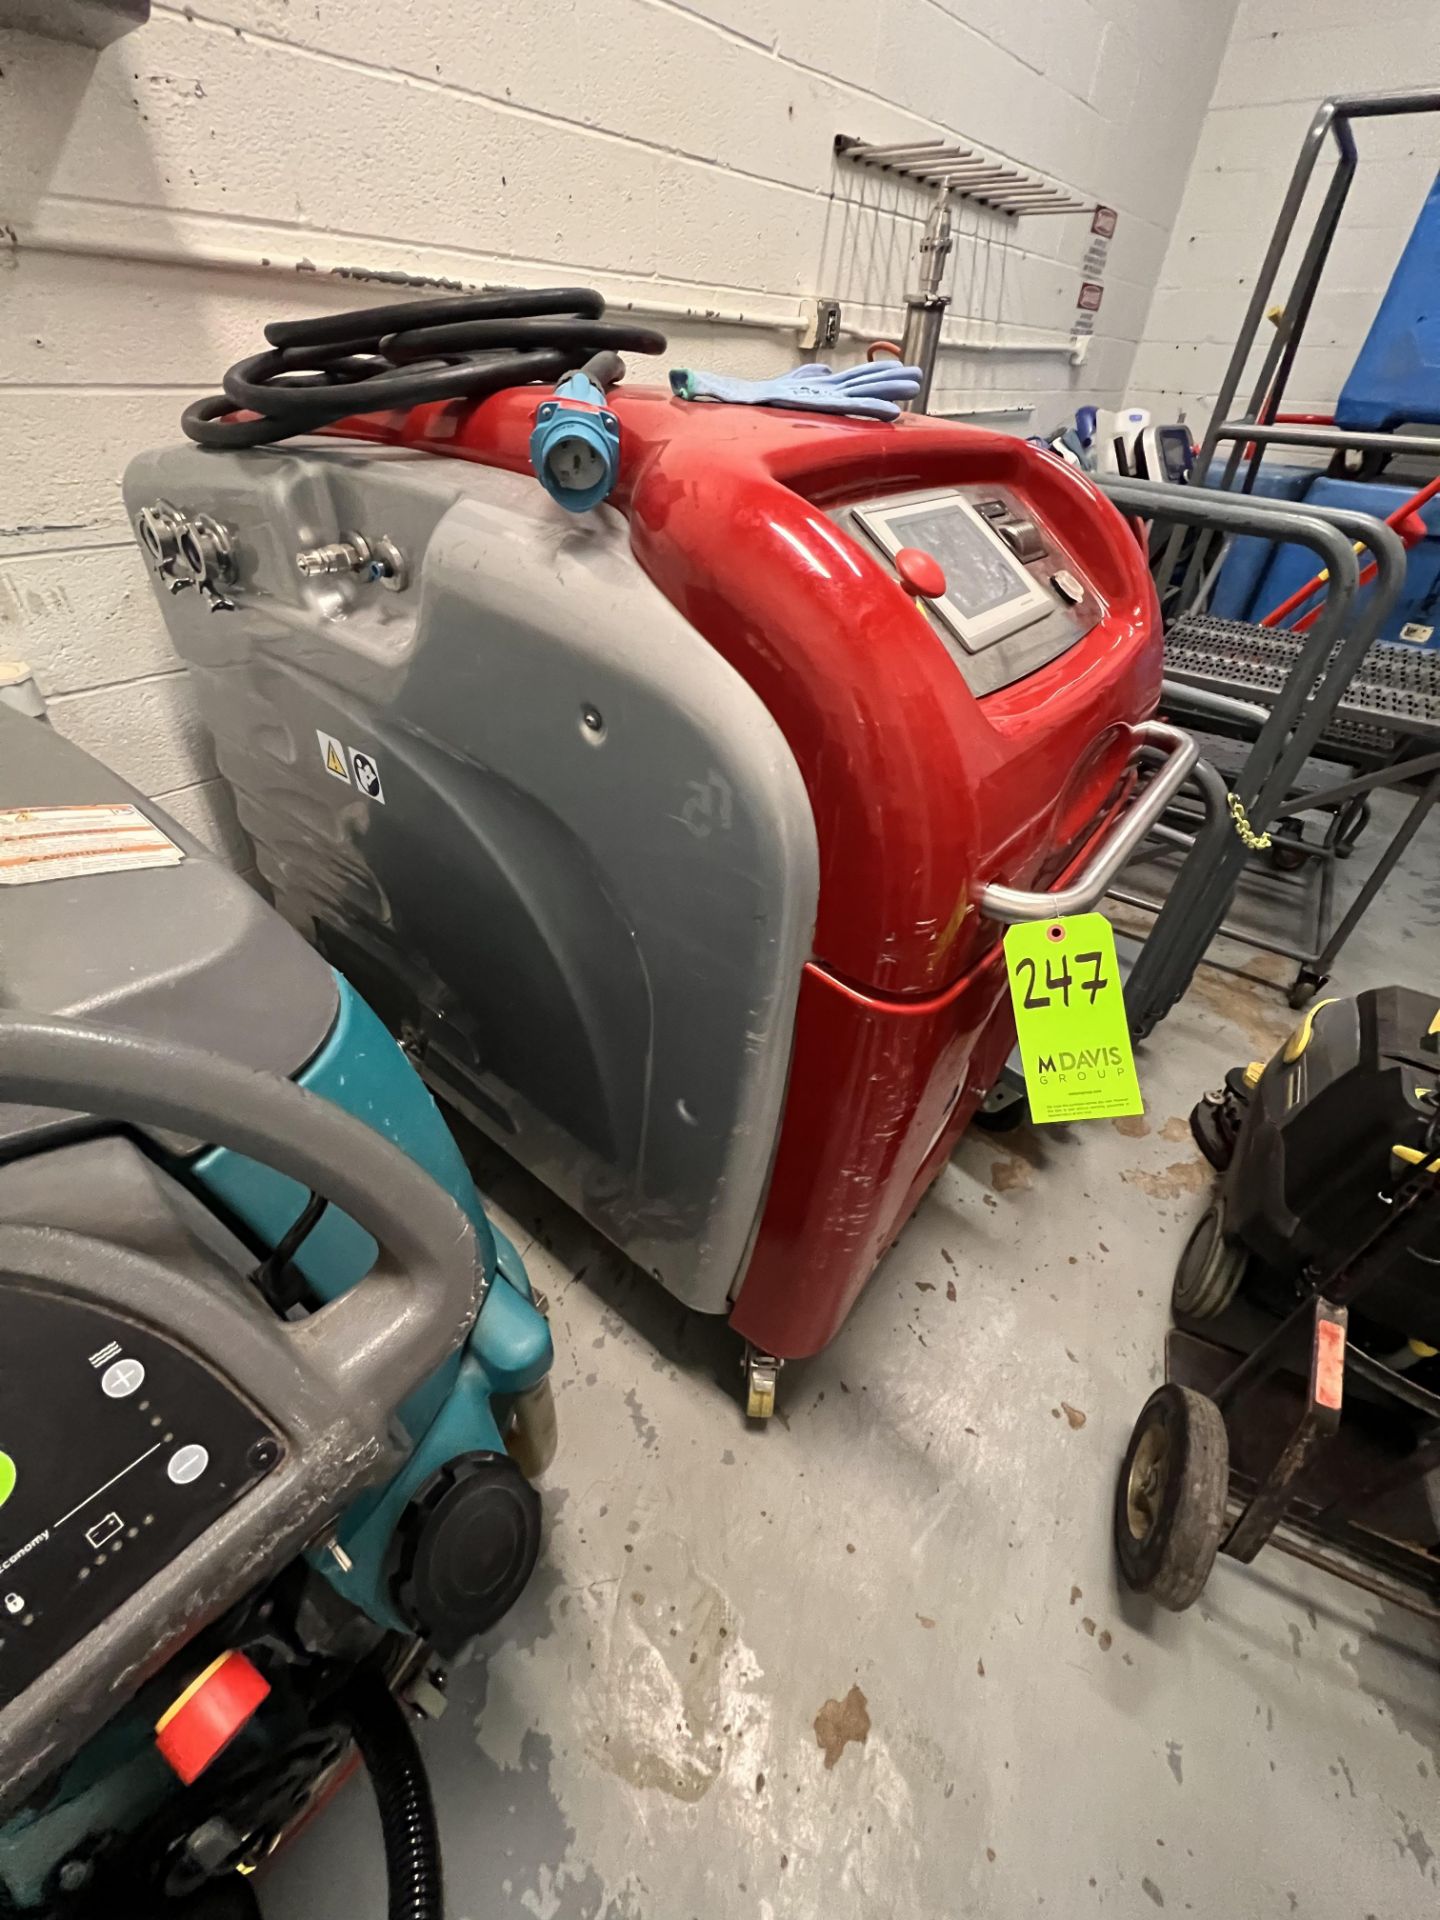 2019 IWT CLEANING EXCELLENCE CIP HP MOBILE WASHER 040, MODEL 9HPMS40, S/N 151152 - Image 3 of 27